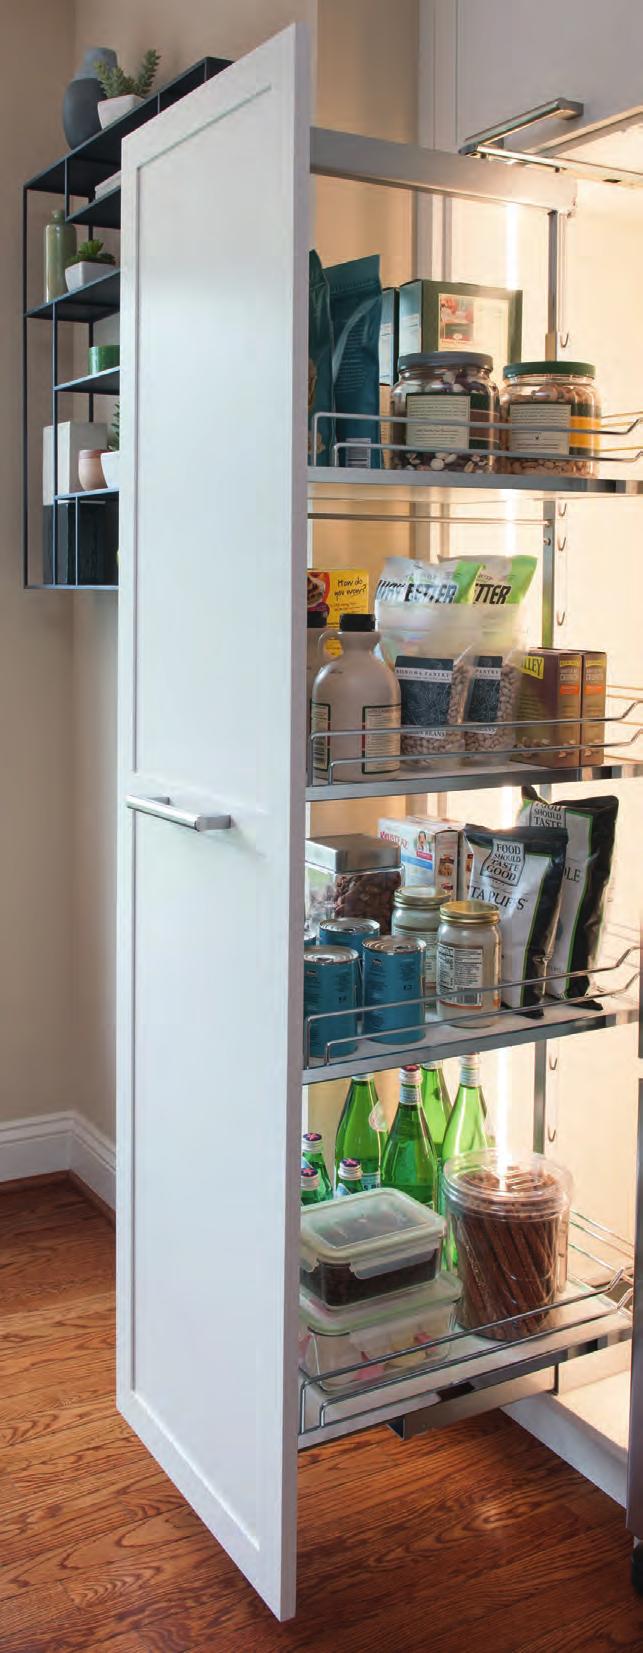 DISPENSA PANTRY UTILIZES THE FULL WIDTH AND HEIGHT OF TALL CABINETS COMPLETELY ELIMINAT- ING